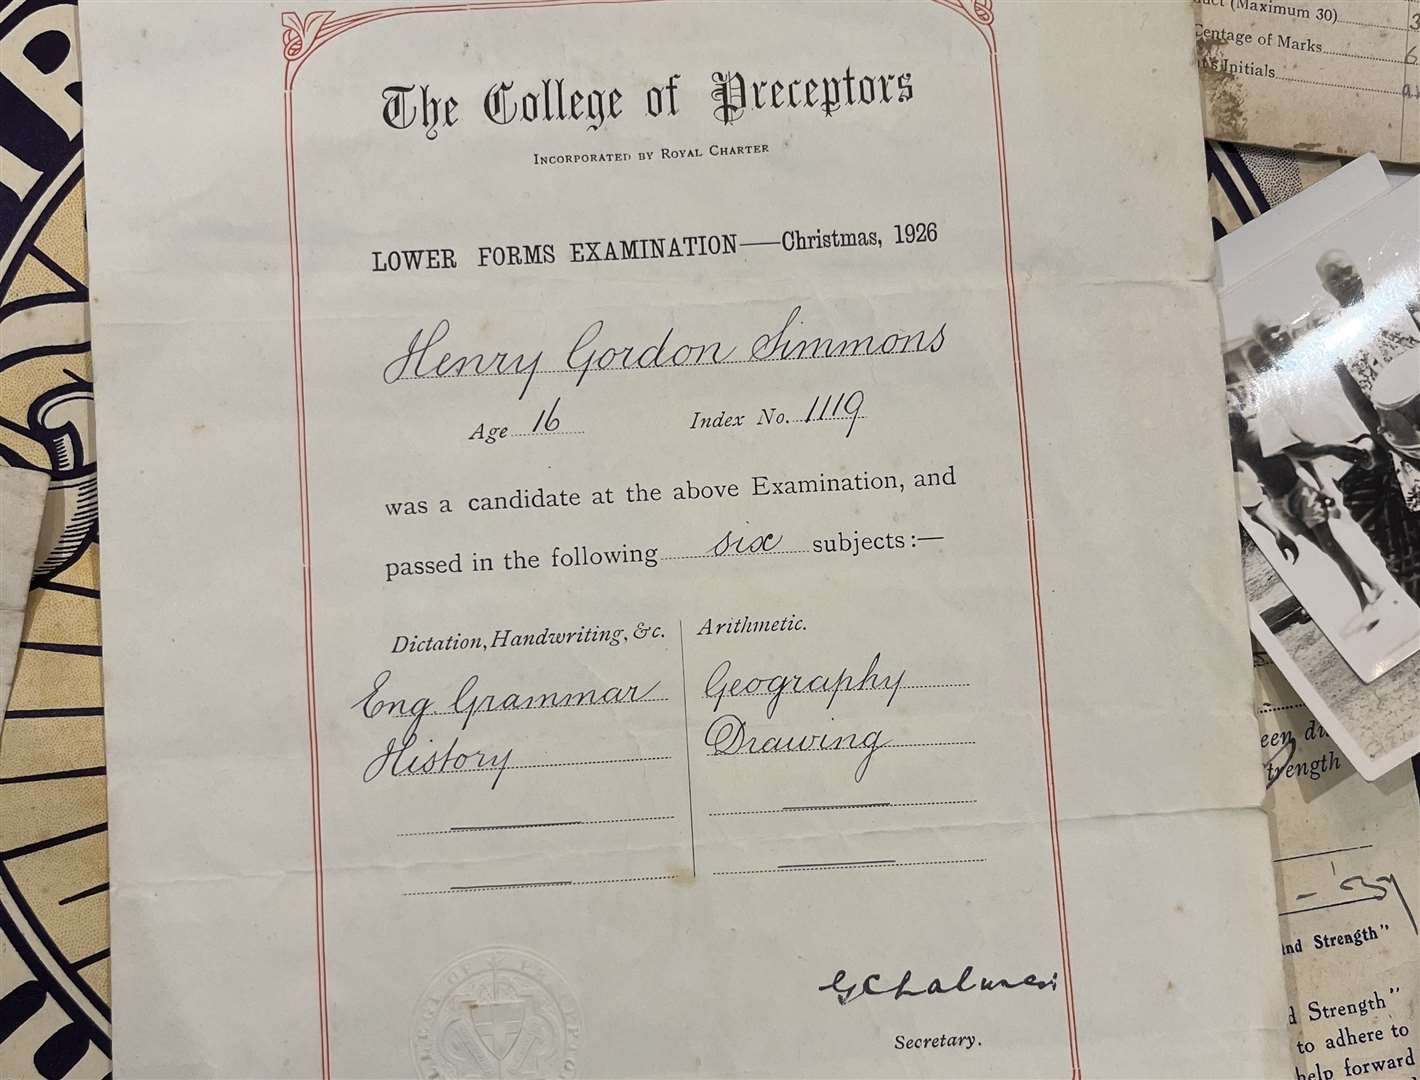 Henry's certificate for passing exams in English grammar, history, drawing and geography at age 16 in 1926